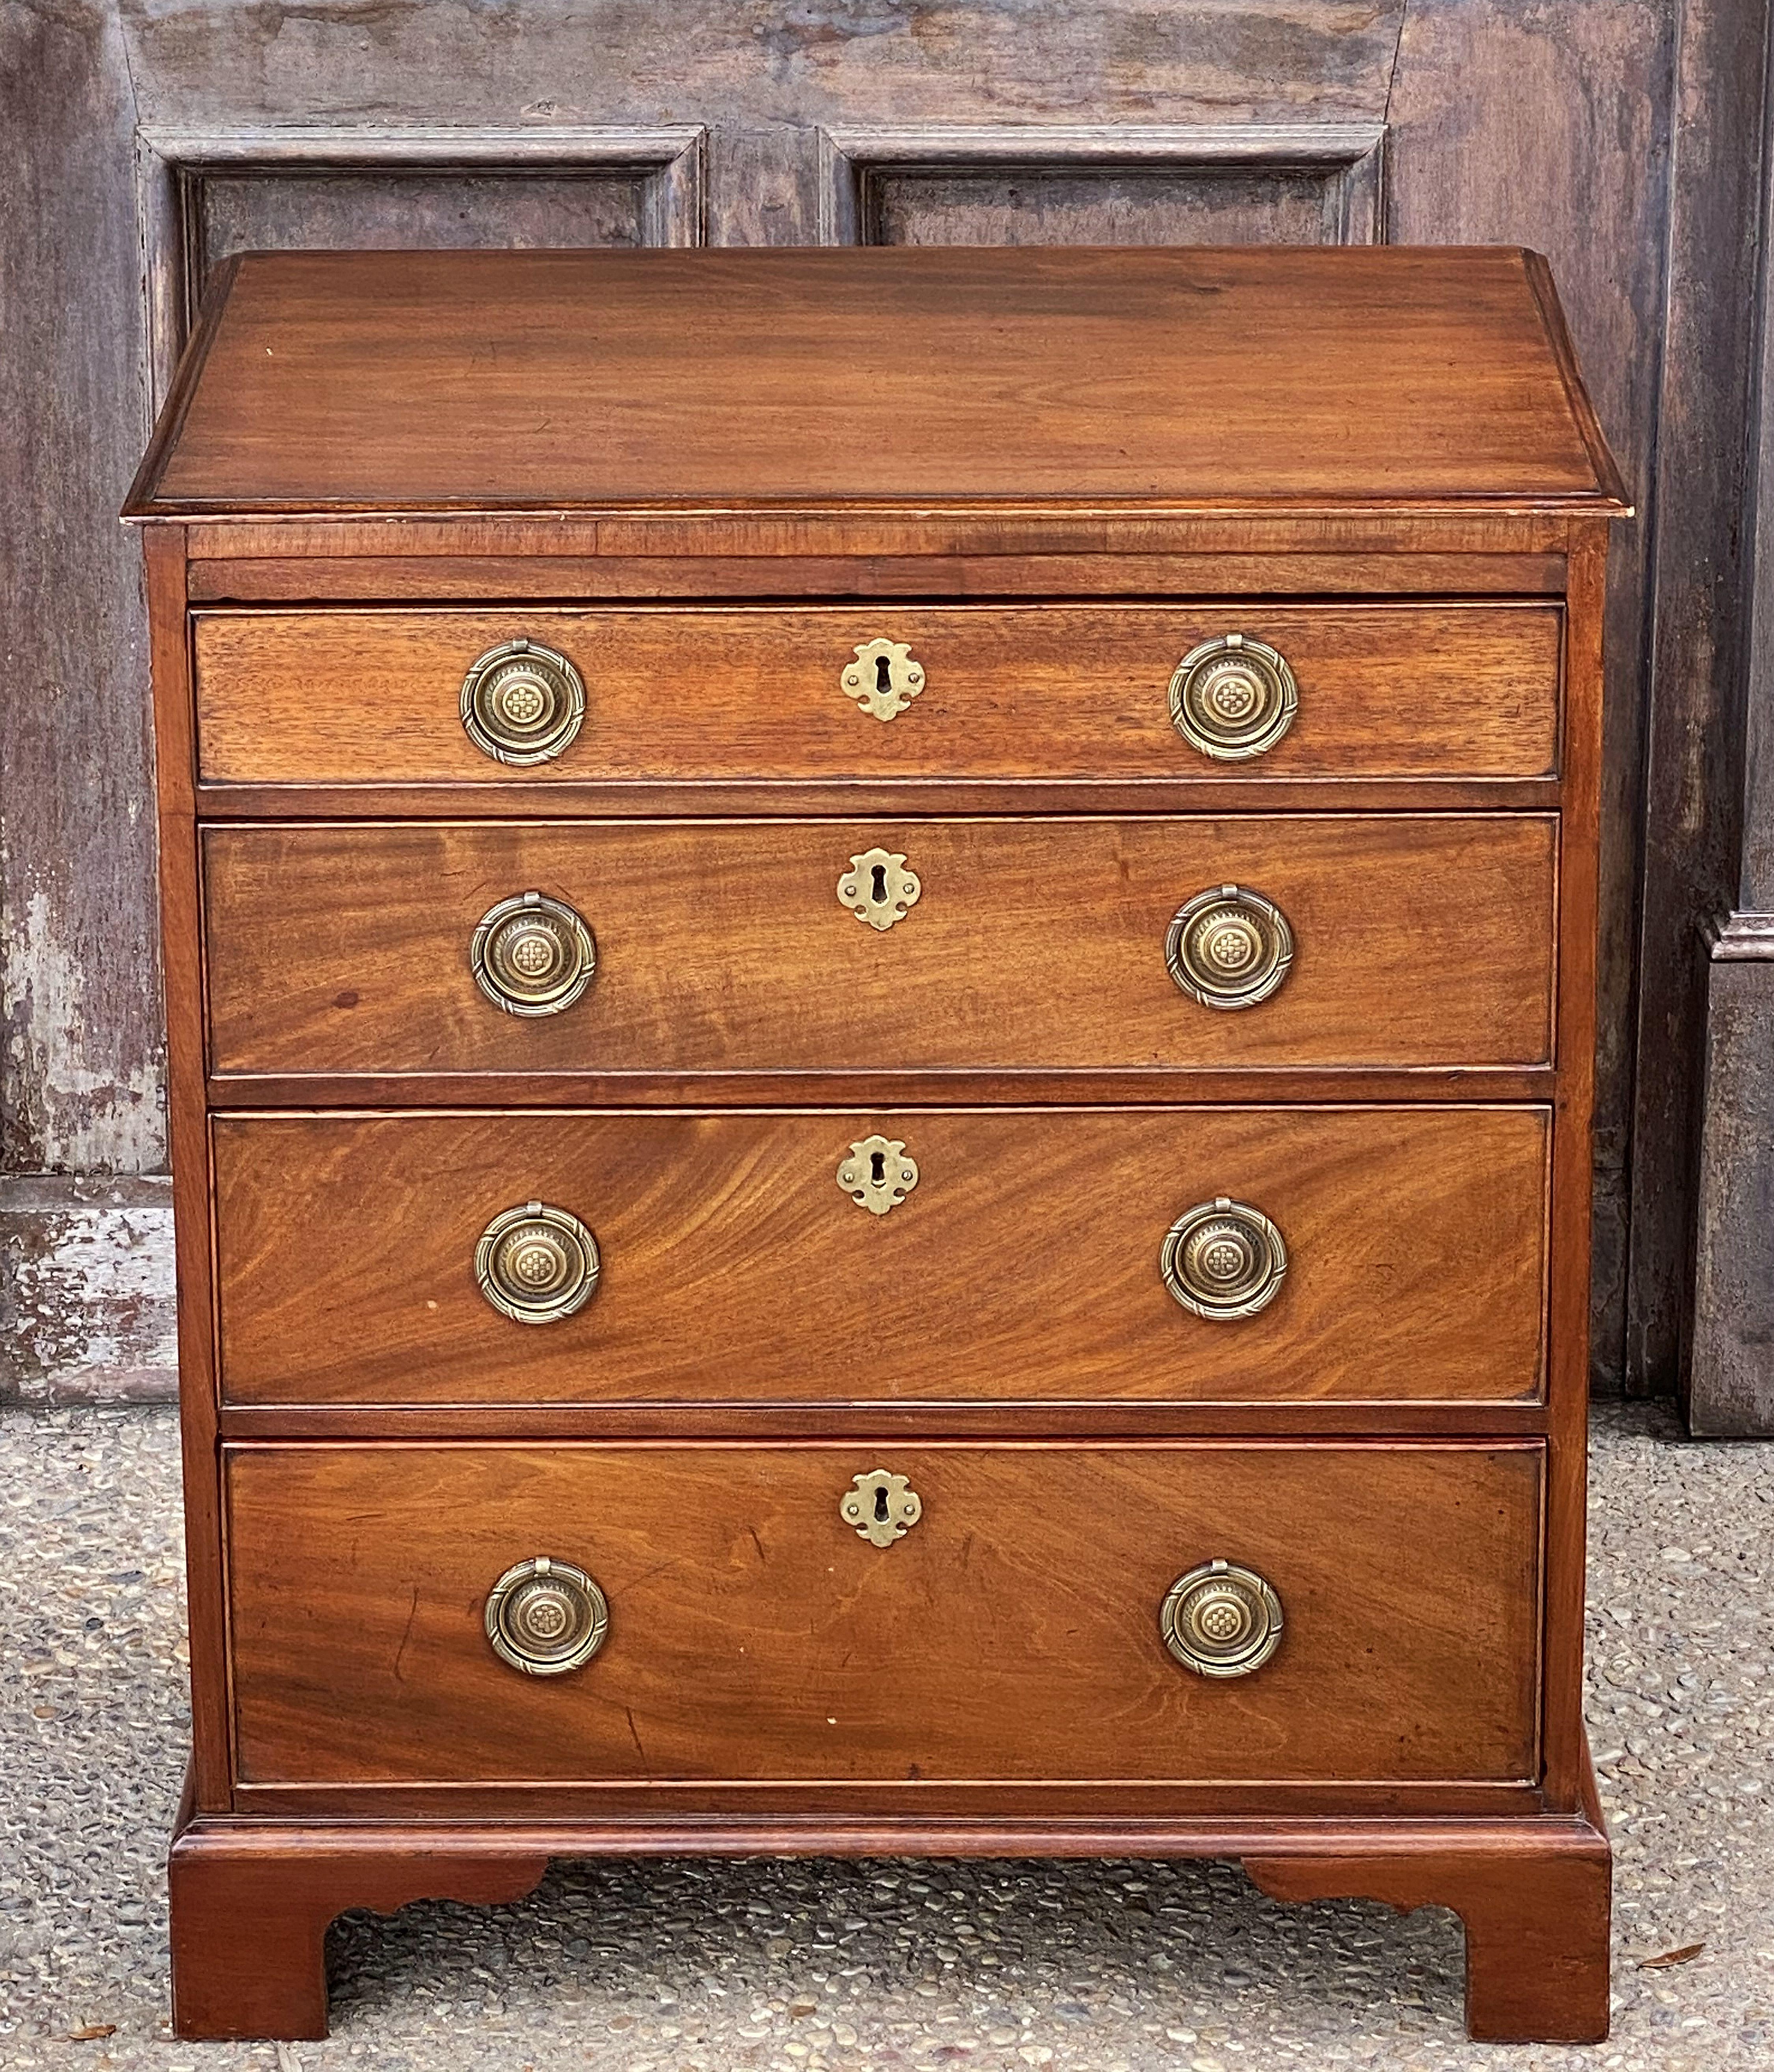 A fine English small chest of mahogany, featuring a moulded top over a frieze of four beaded drawers in ascending size, each drawer with brass ring pulls and brass escutcheon, set upon bracket feet.